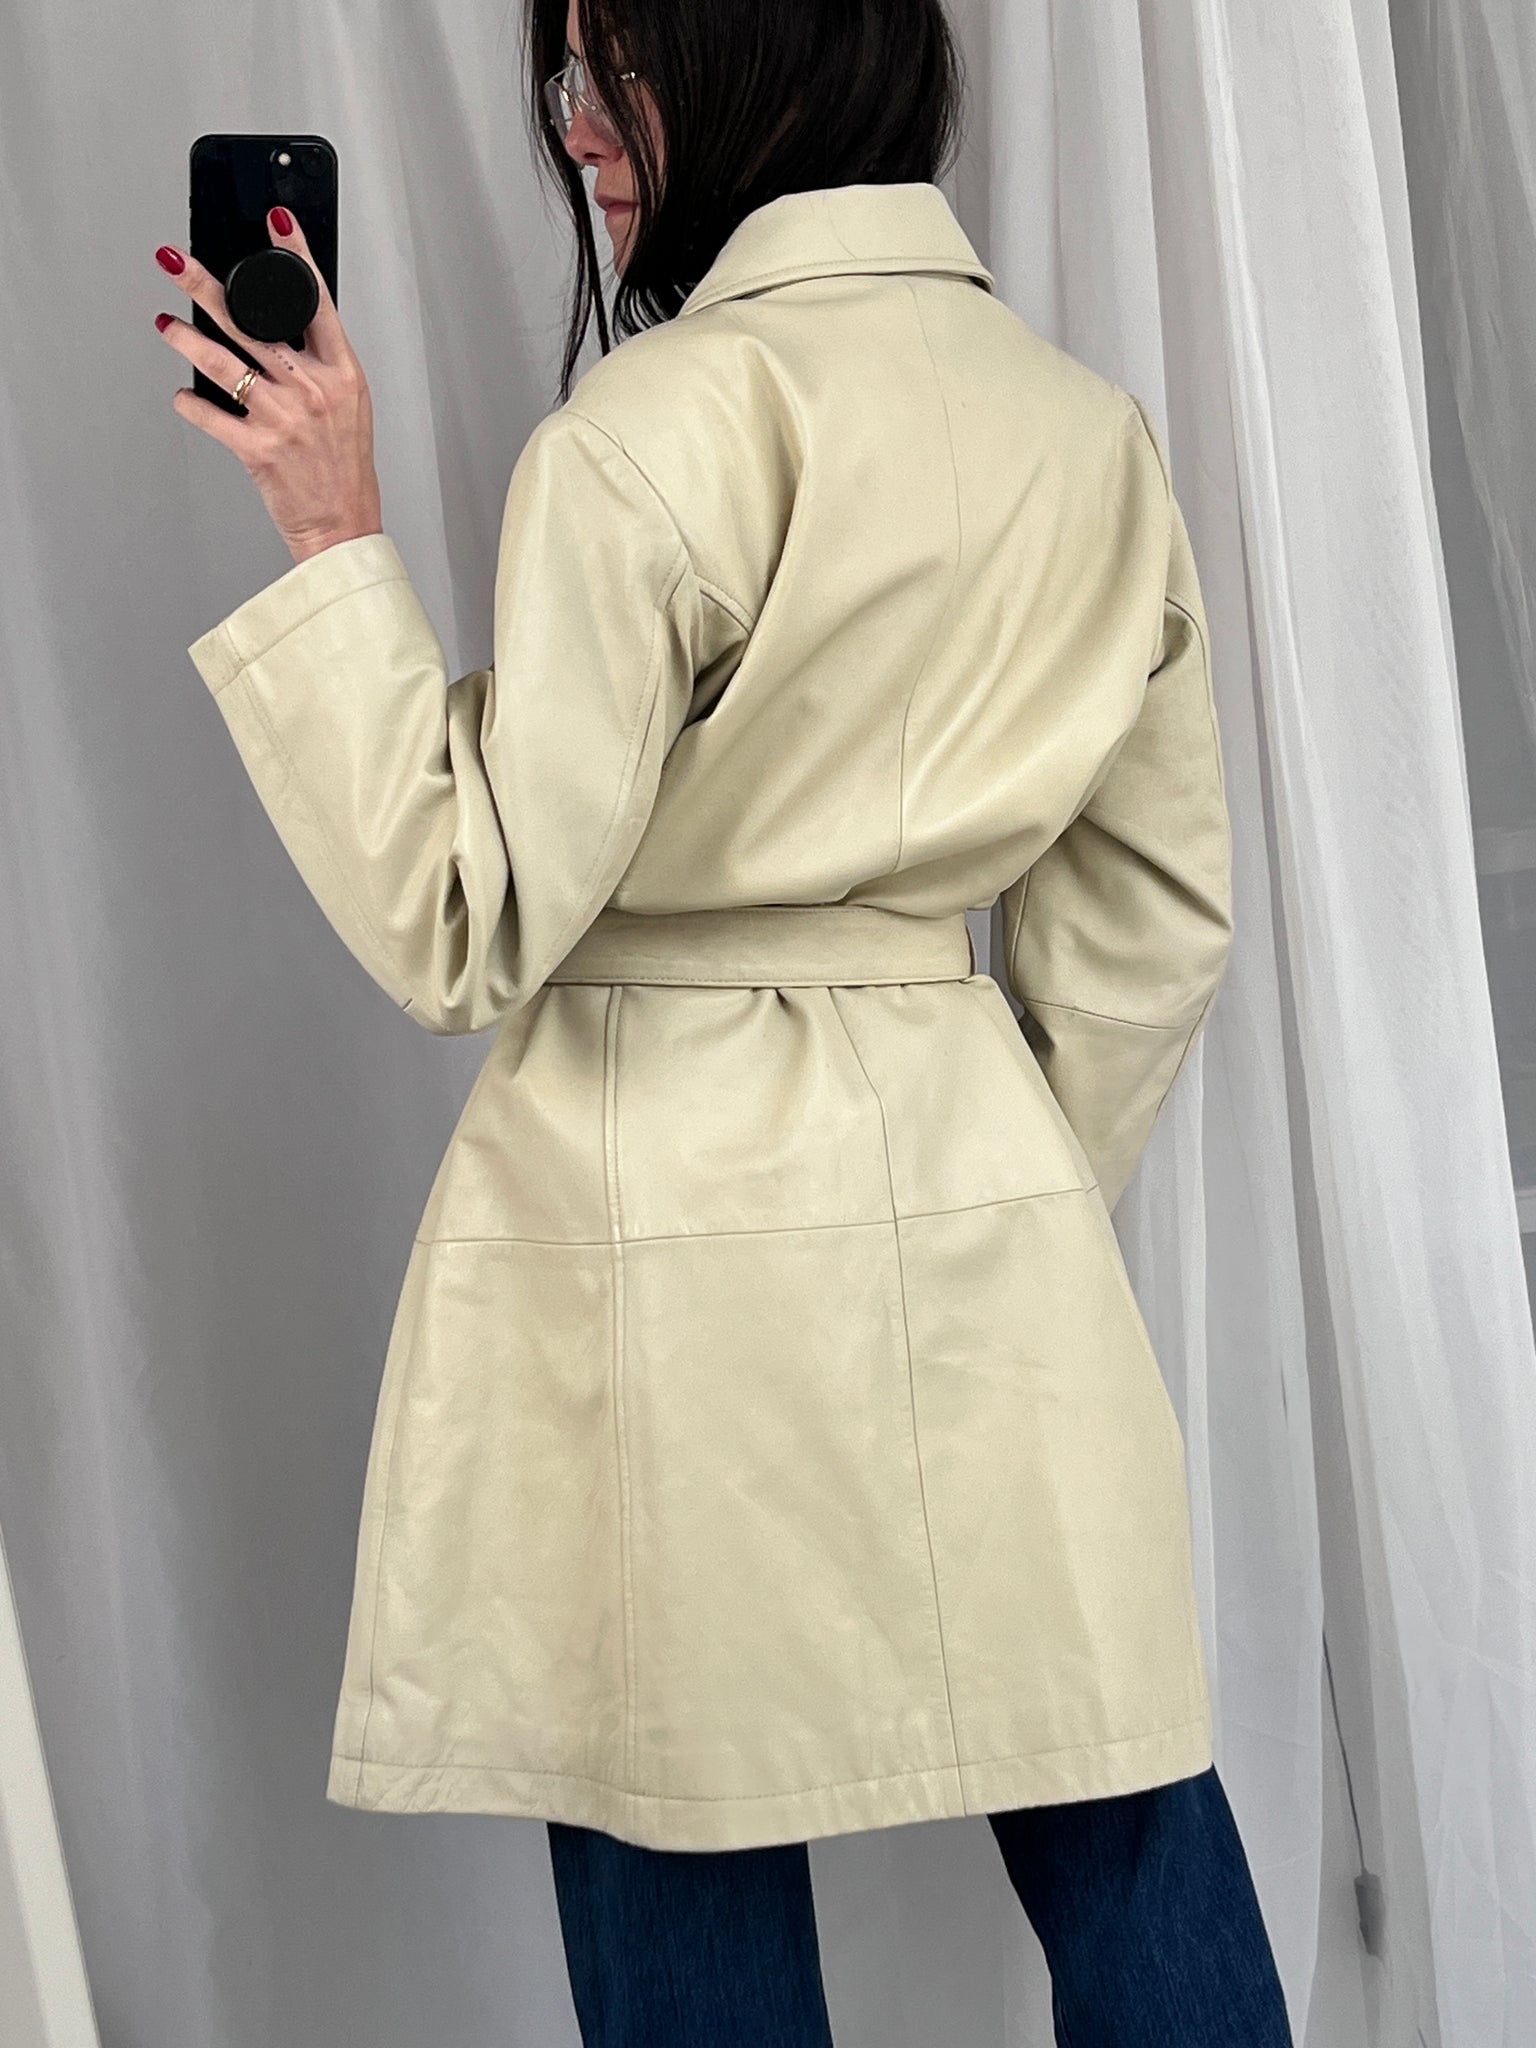 Excelled white leather trench